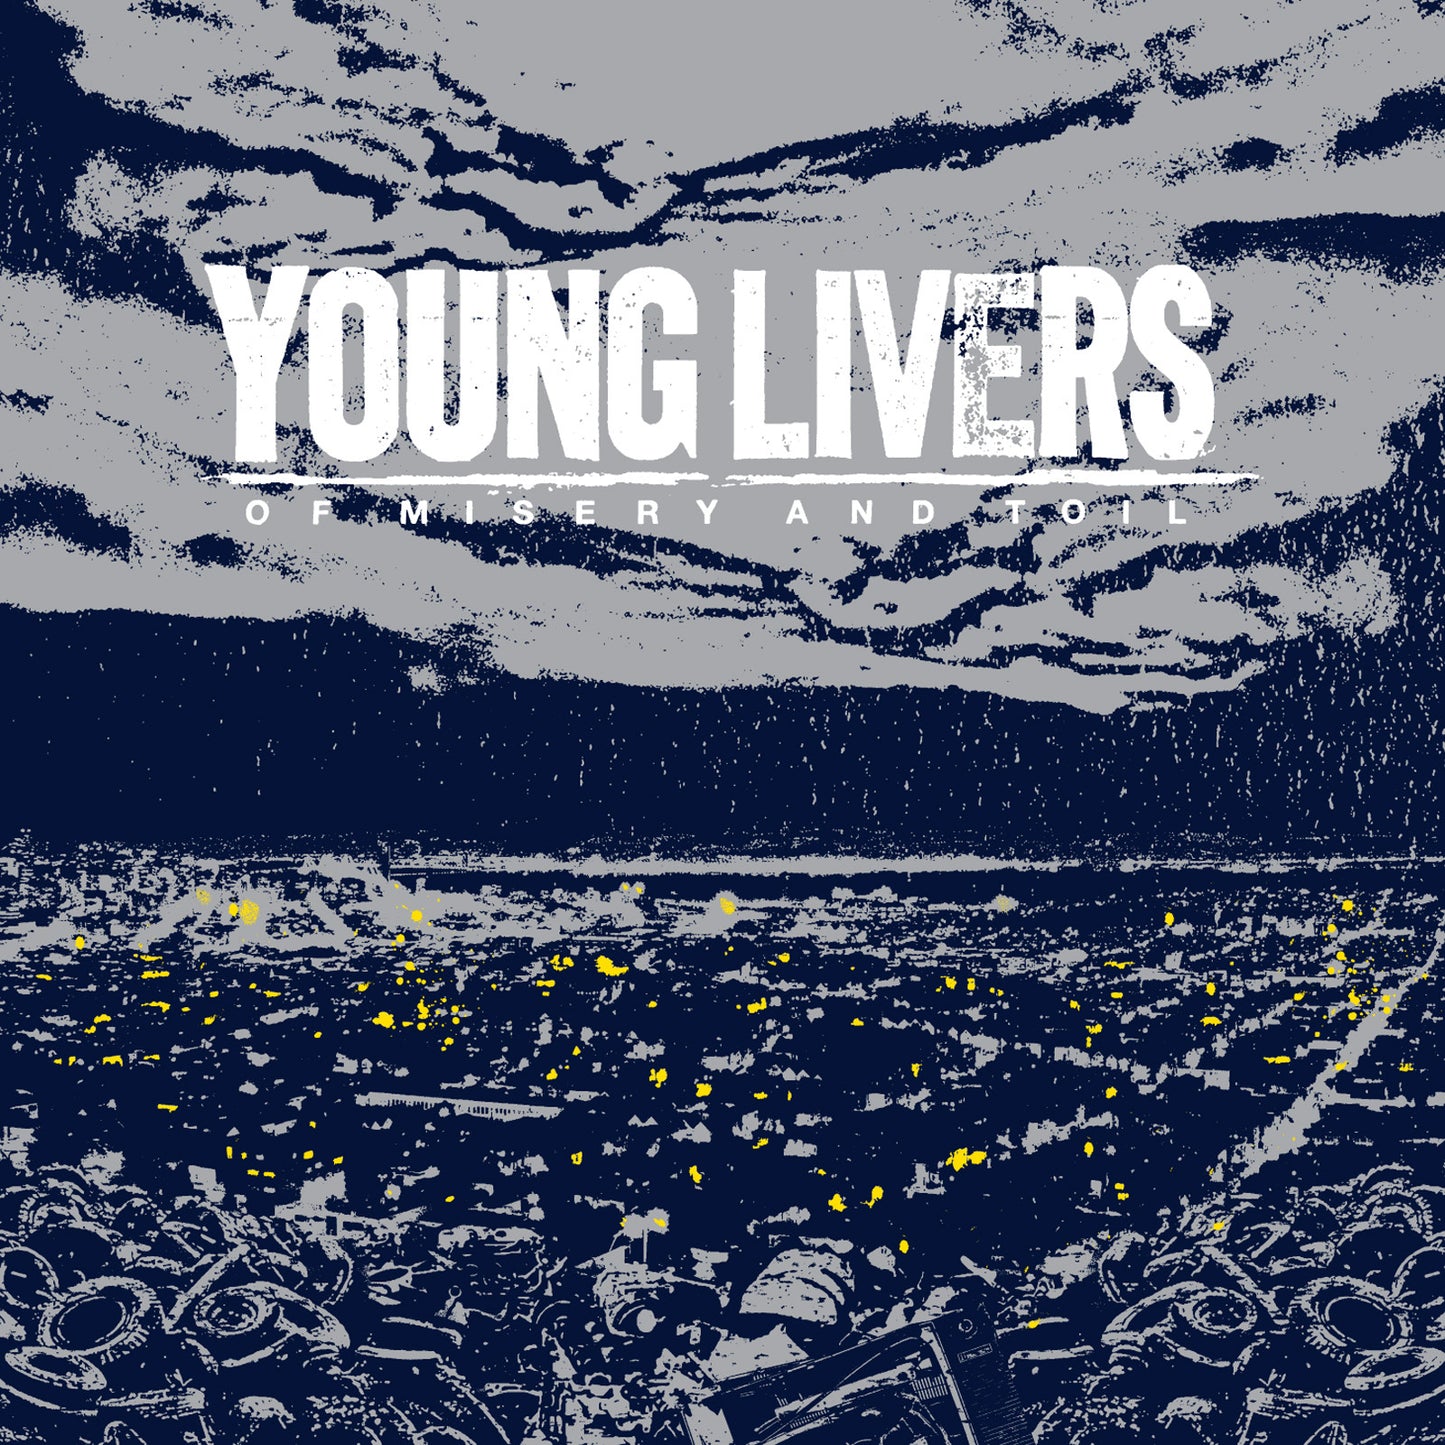 YOUNG LIVERS "Of Misery And Toil"